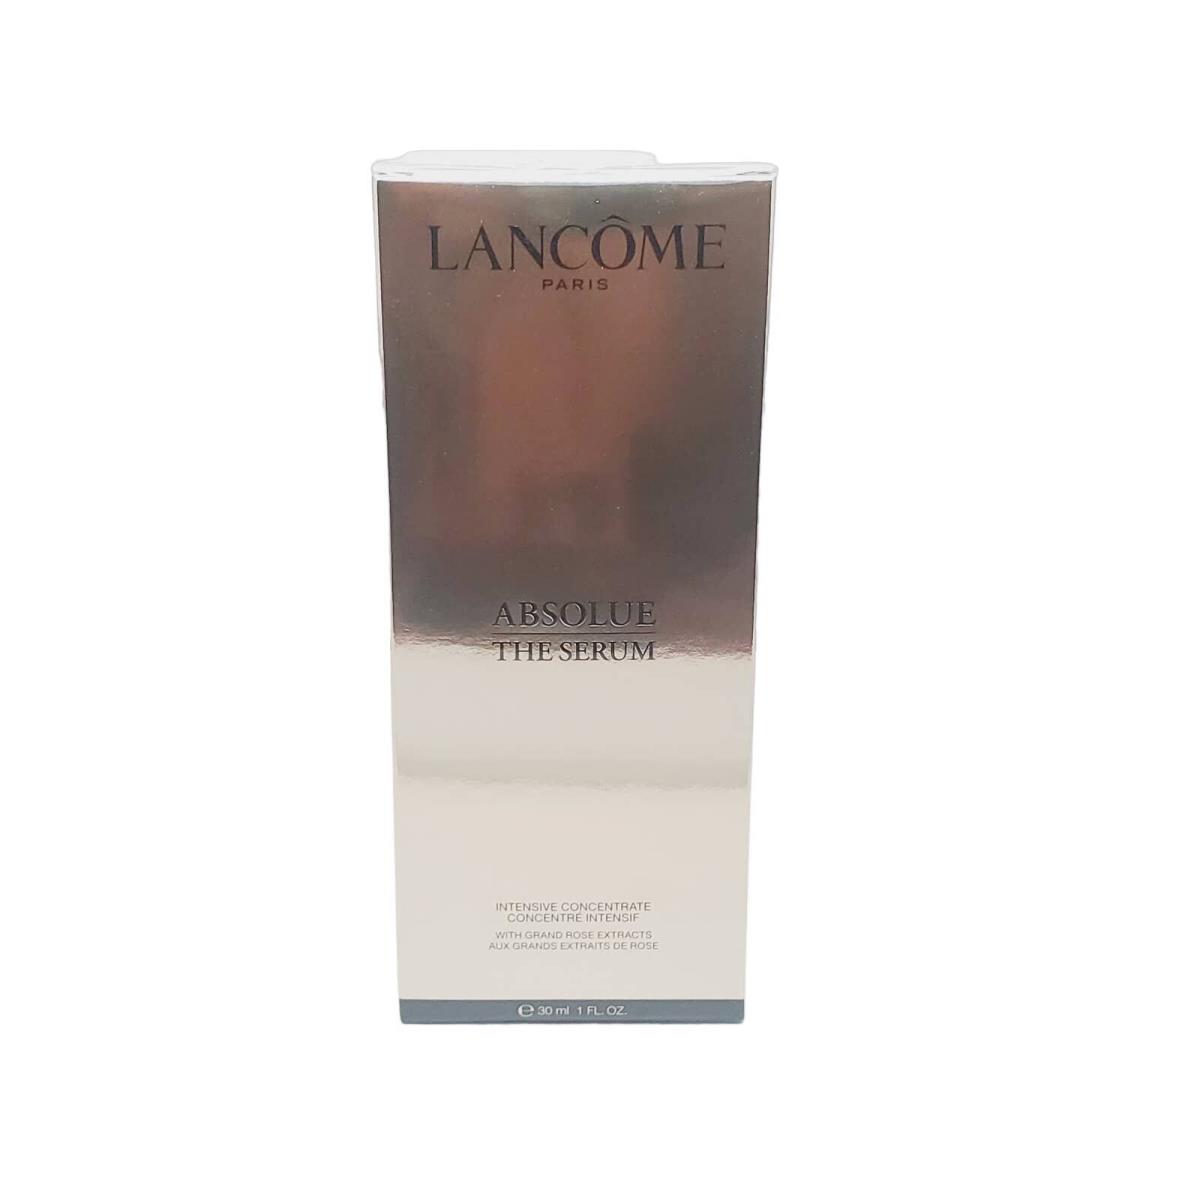 Lancome Absolue The Serum Intensive Concentrate with Grand Rose Extracts 1 OZ